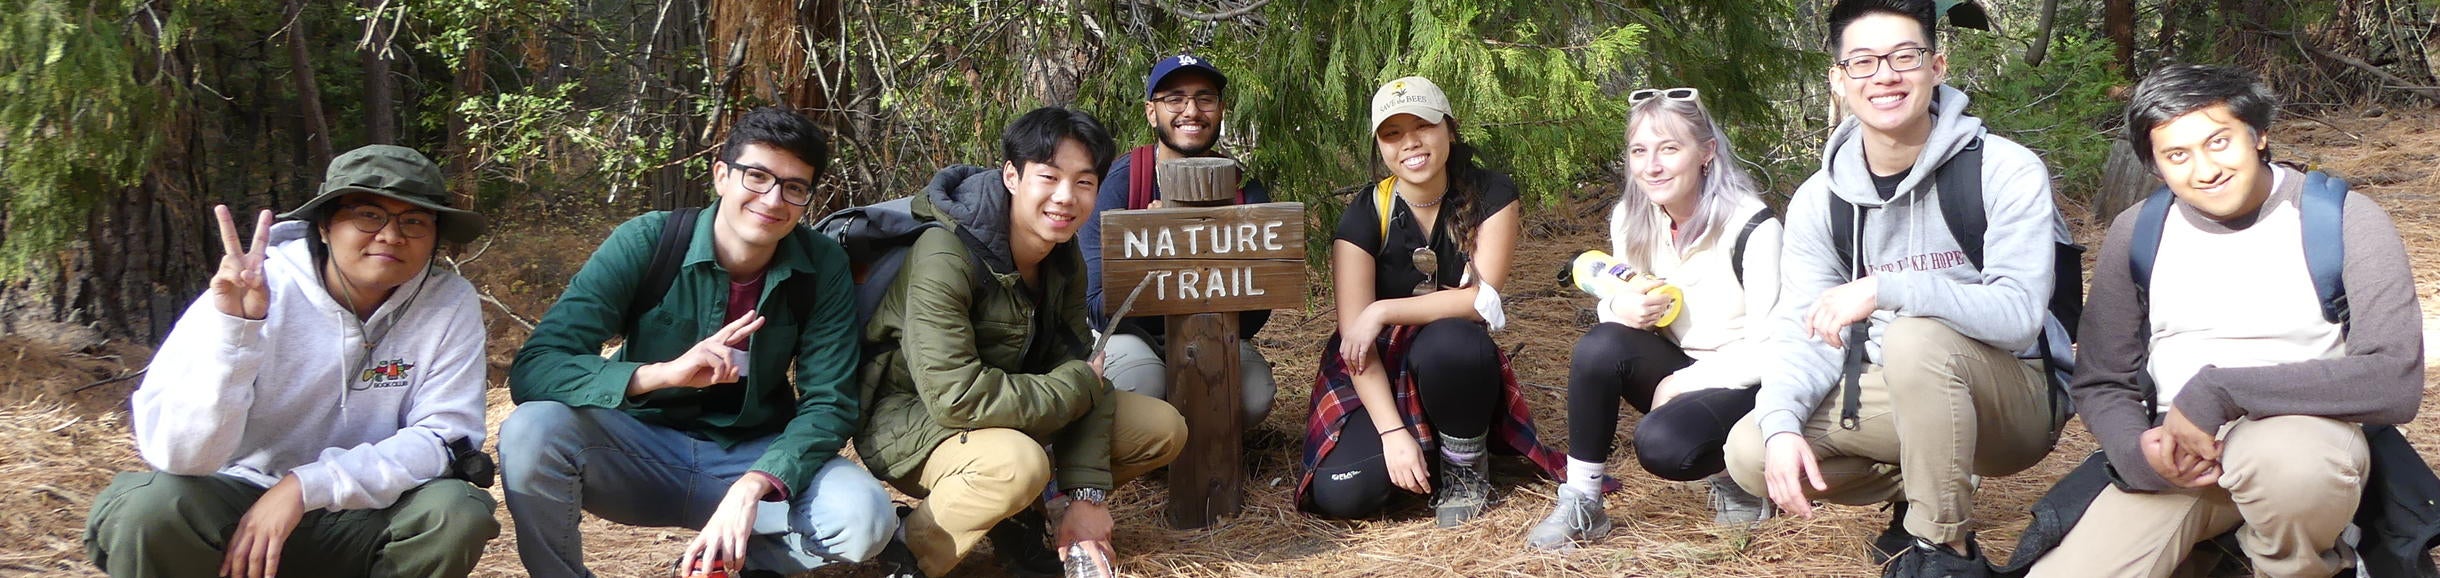 students on nature trail